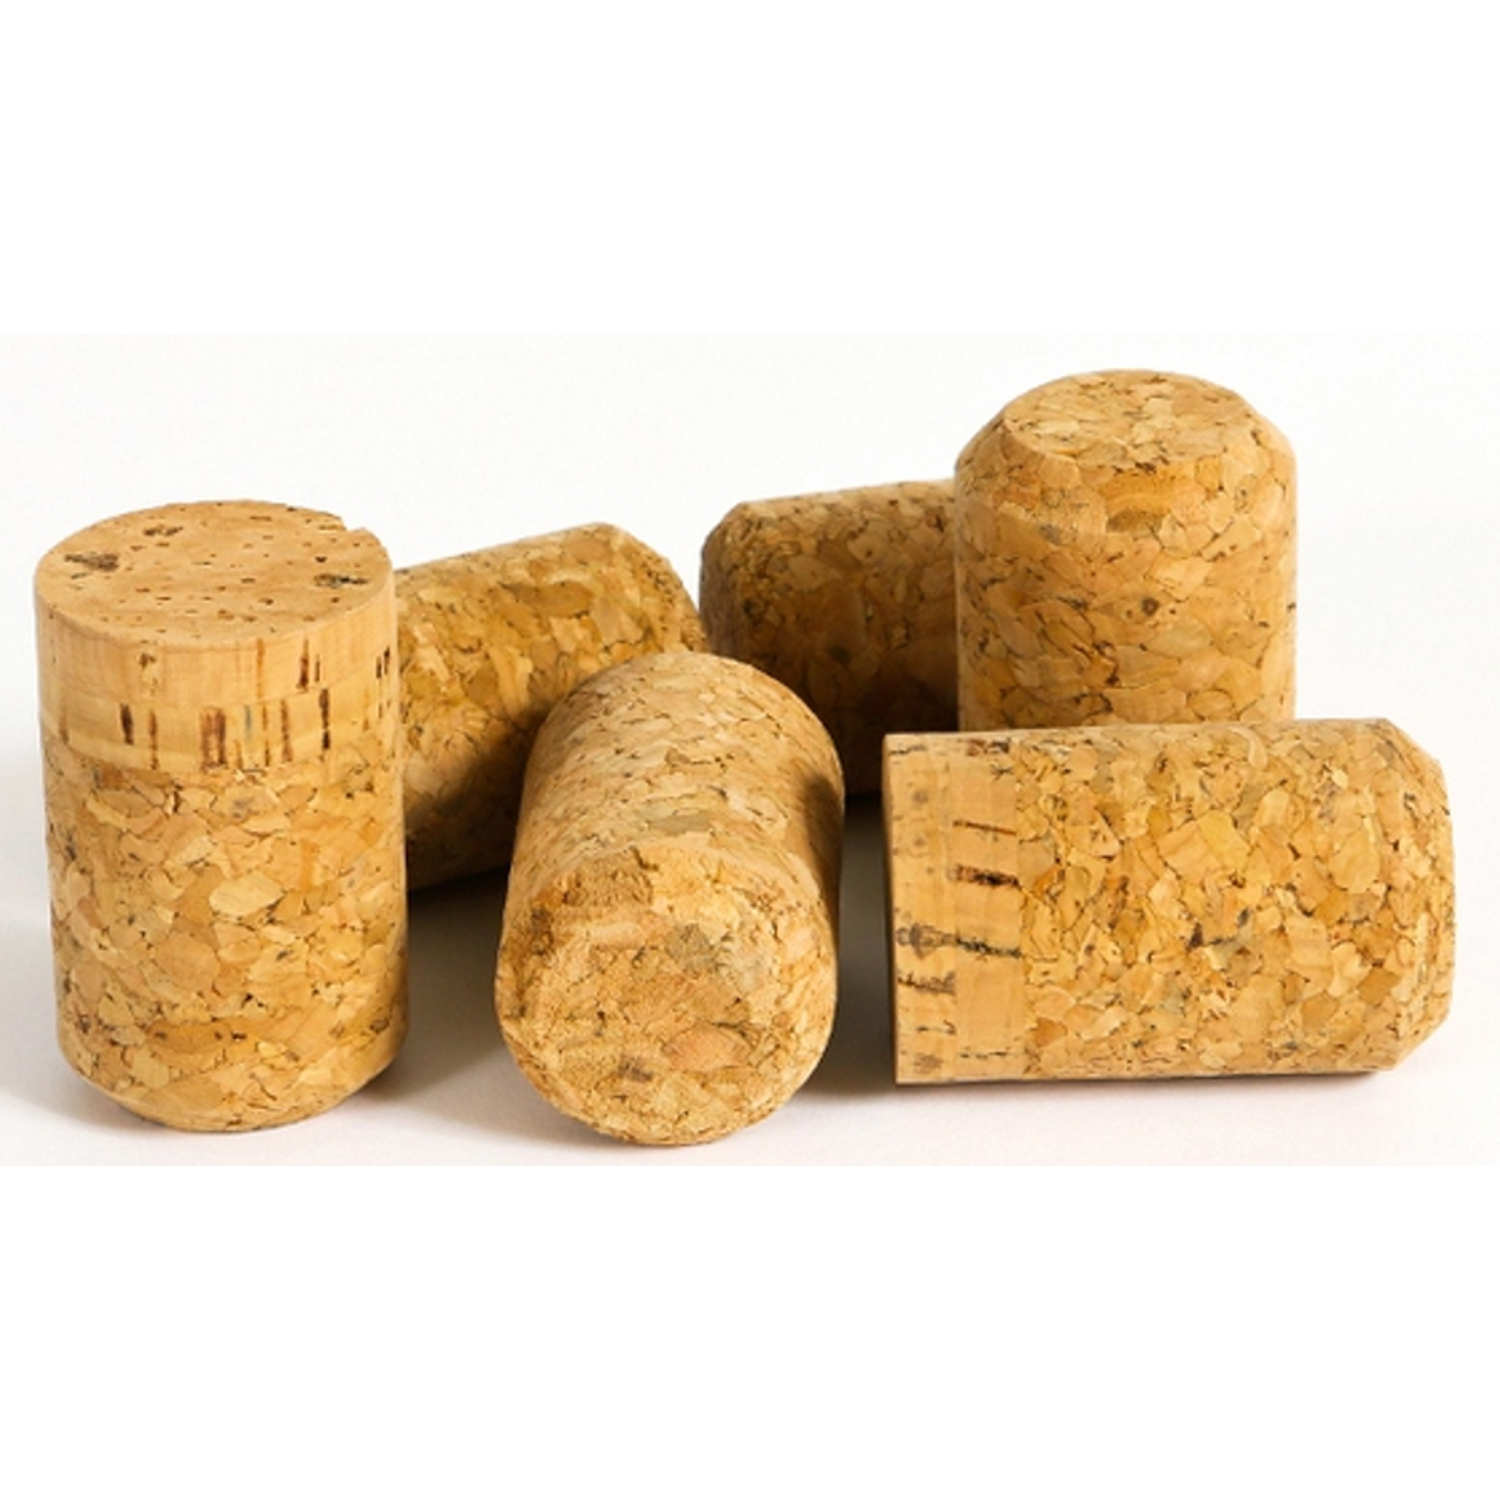 15/16 x 1 3/4 Micro-Pearl Agglomerated Premium Flipping Off Wine Stoppers Flipping Corks New Wine Bottle Corks| 24mm x 44mm Bag of 50 Excellent for Bottling or Corks for Crafts 